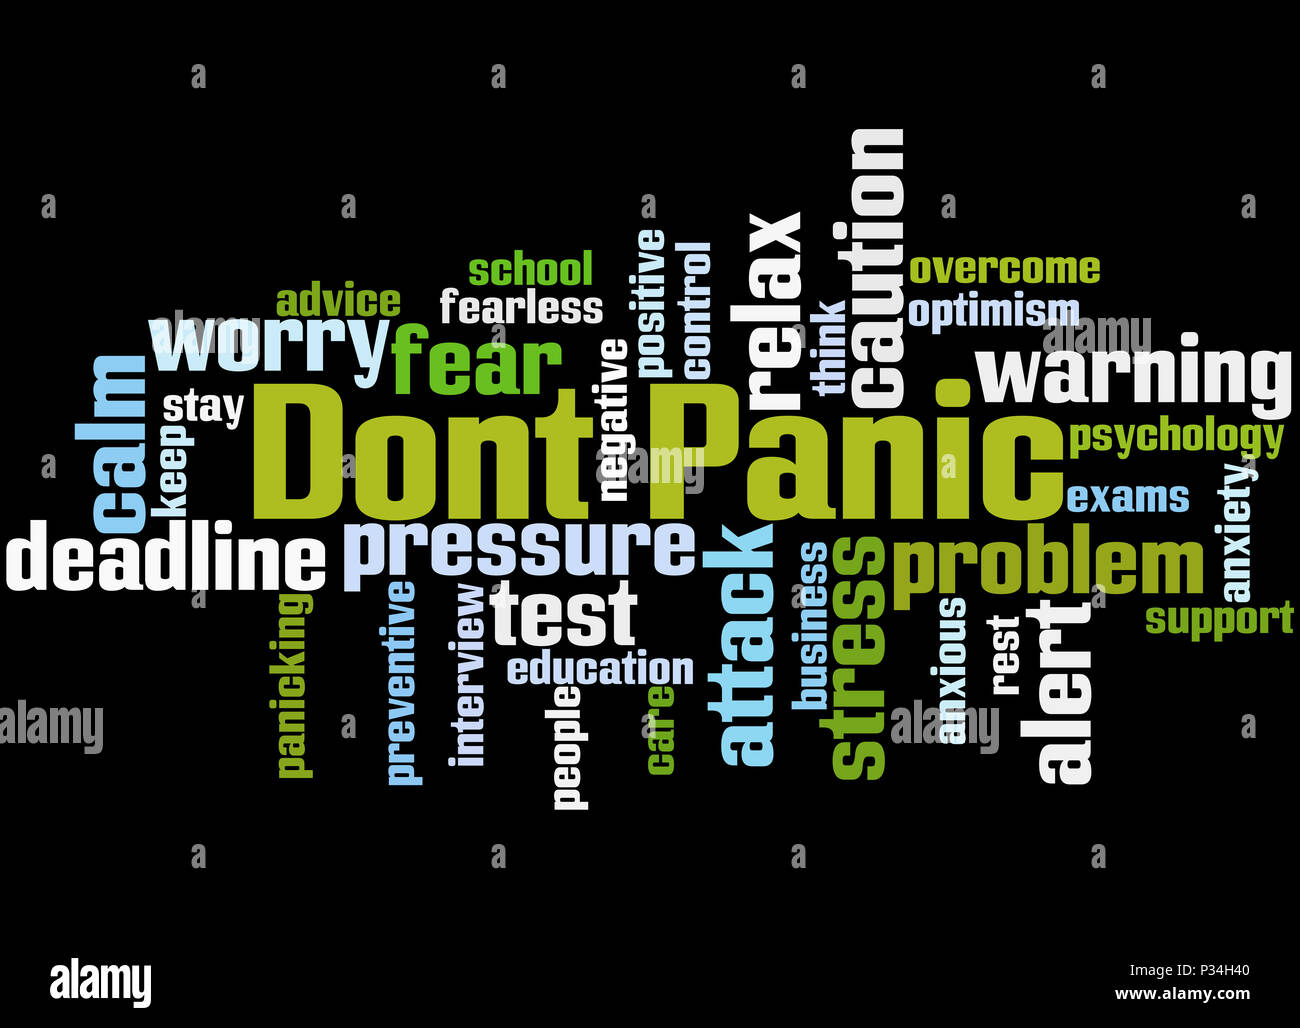 Dont Panic, word cloud concept on black background. Stock Photo